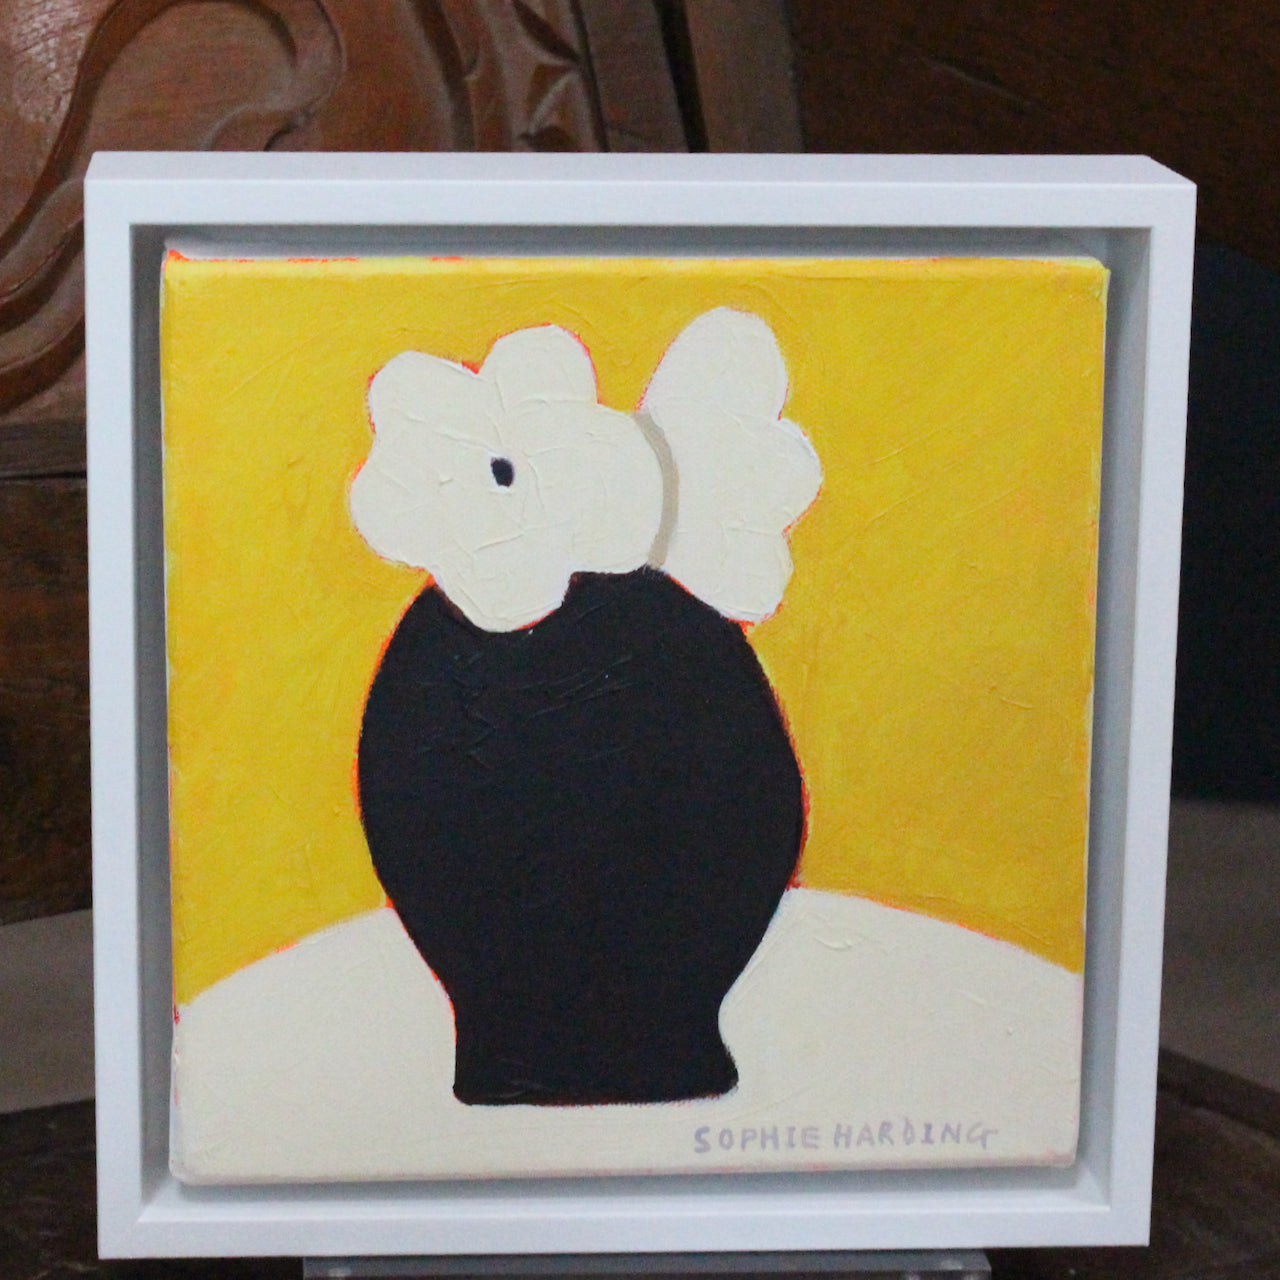 A framed Sophie Harding painting of white flowers in a black vase against a yellow background.